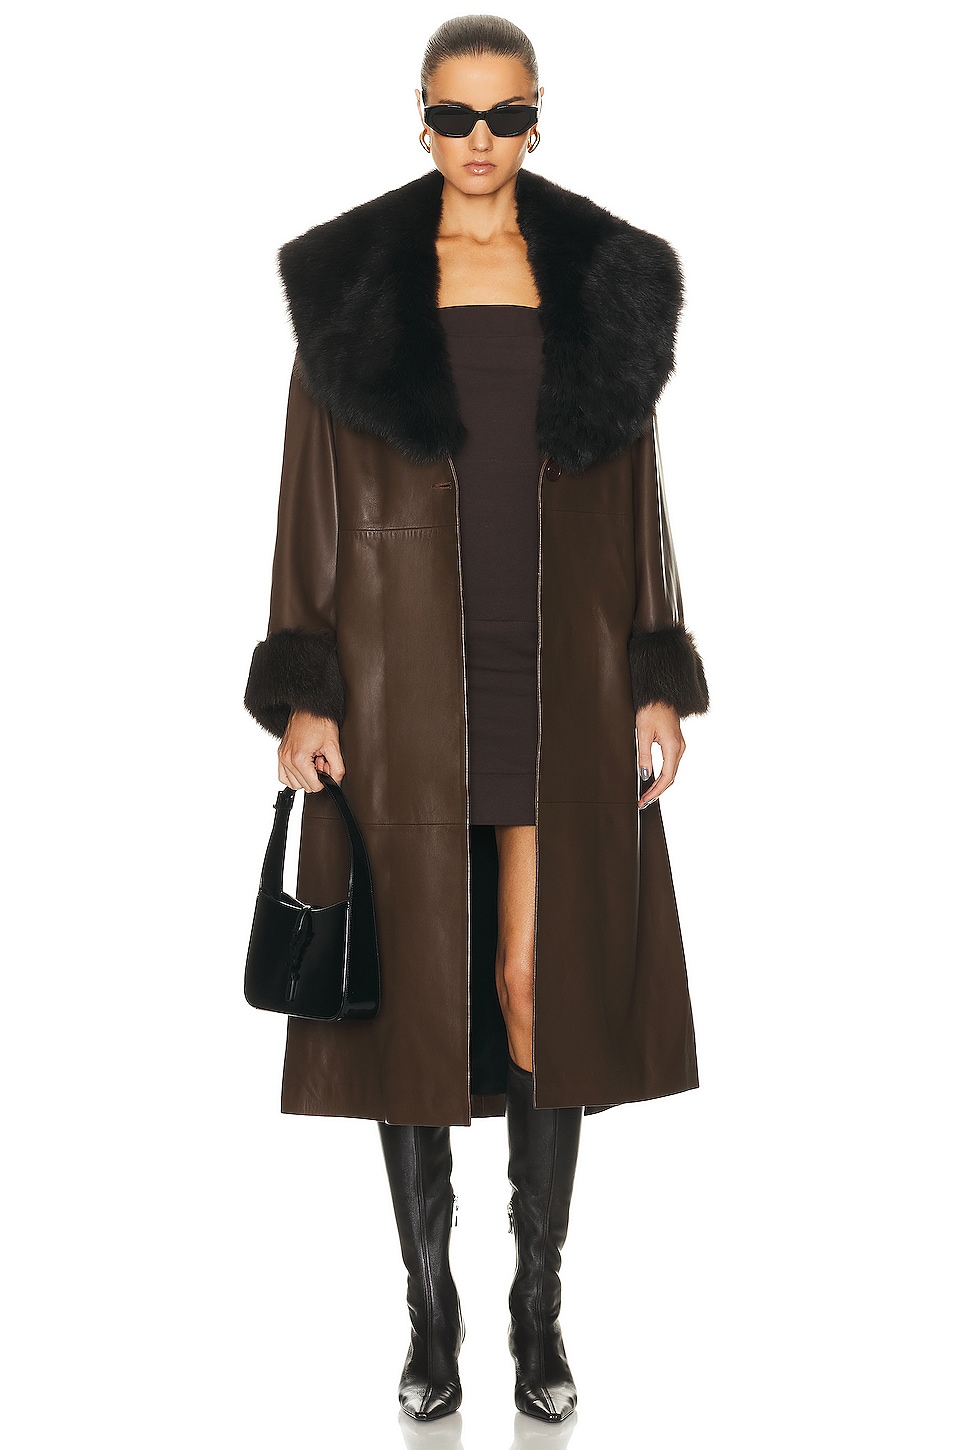 Image 1 of NOUR HAMMOUR Freja Relaxed Belted Trench Coat in Walnut & Expresso